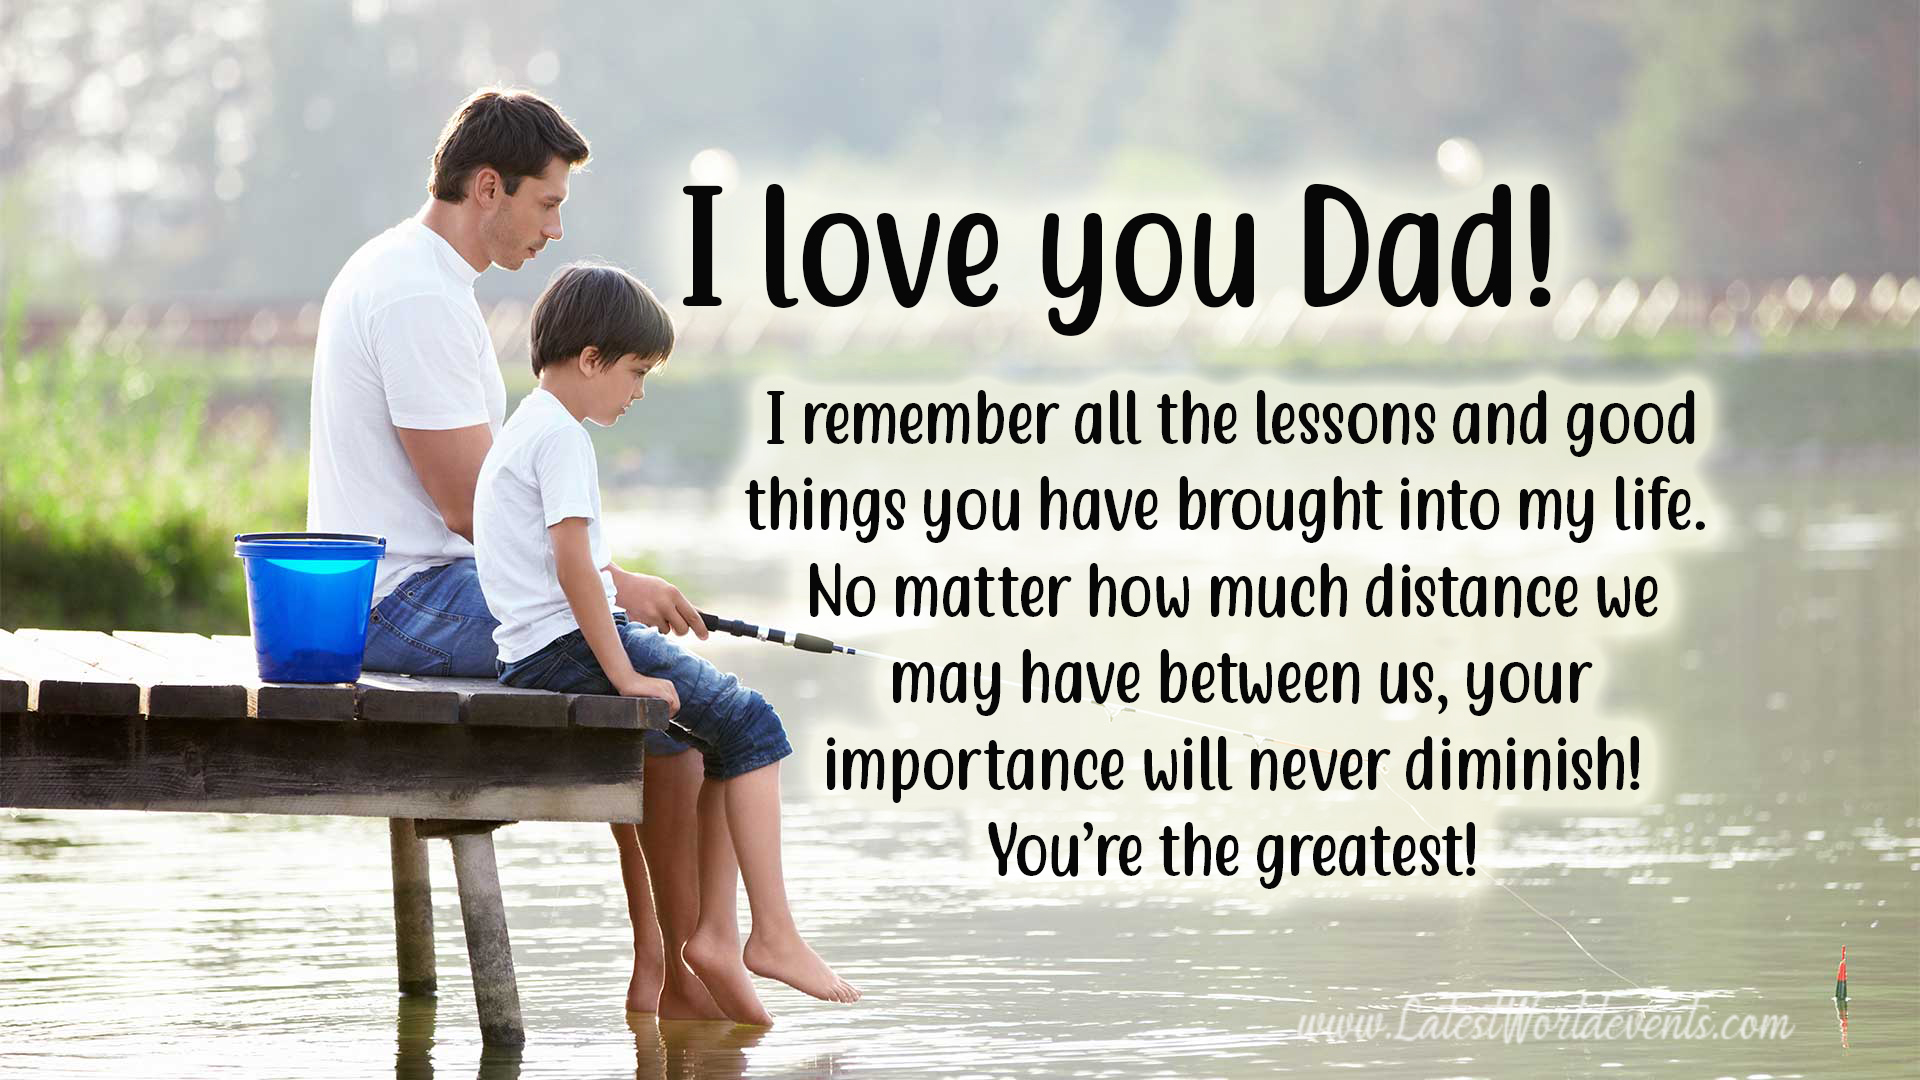 I Love You Dad Quotes From Daughter 9to5 Car Wallpapers Latest Downloads